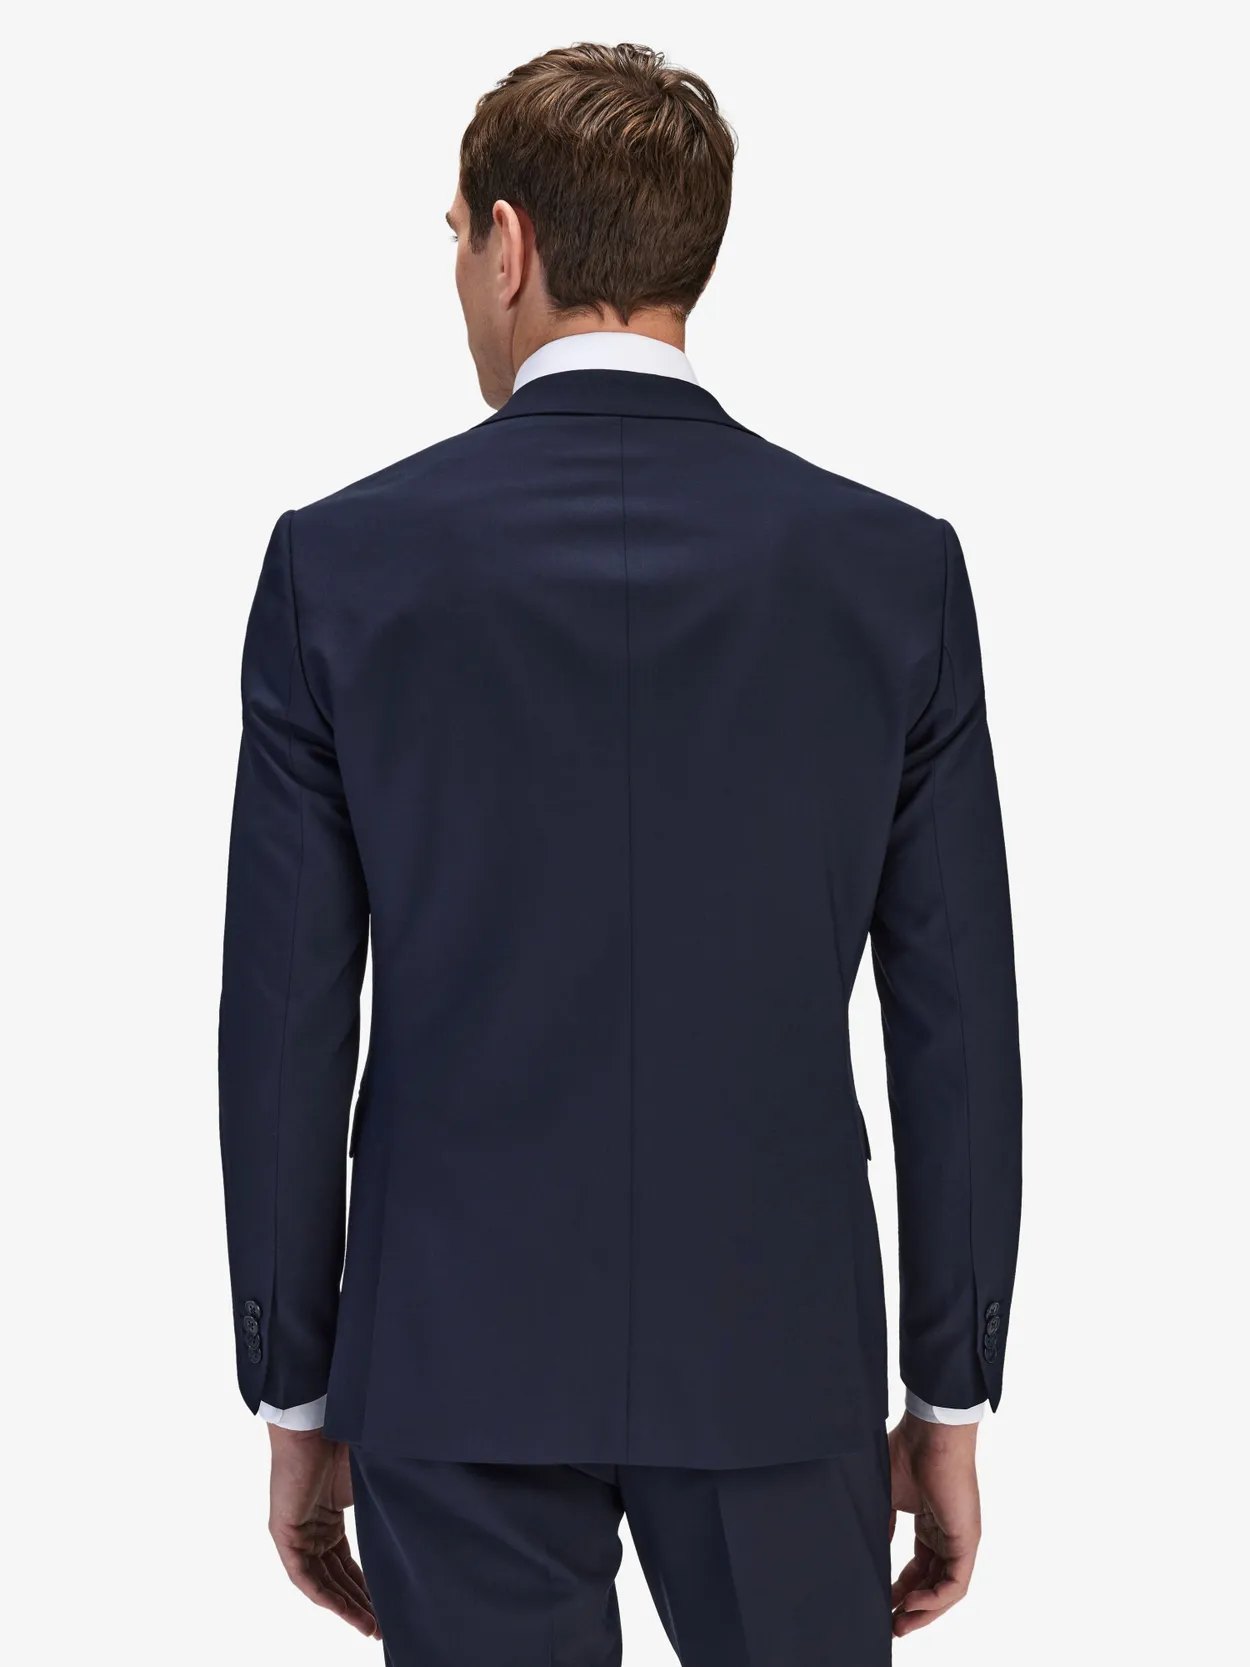 Image number 4 for product Blue Suit & Shirt